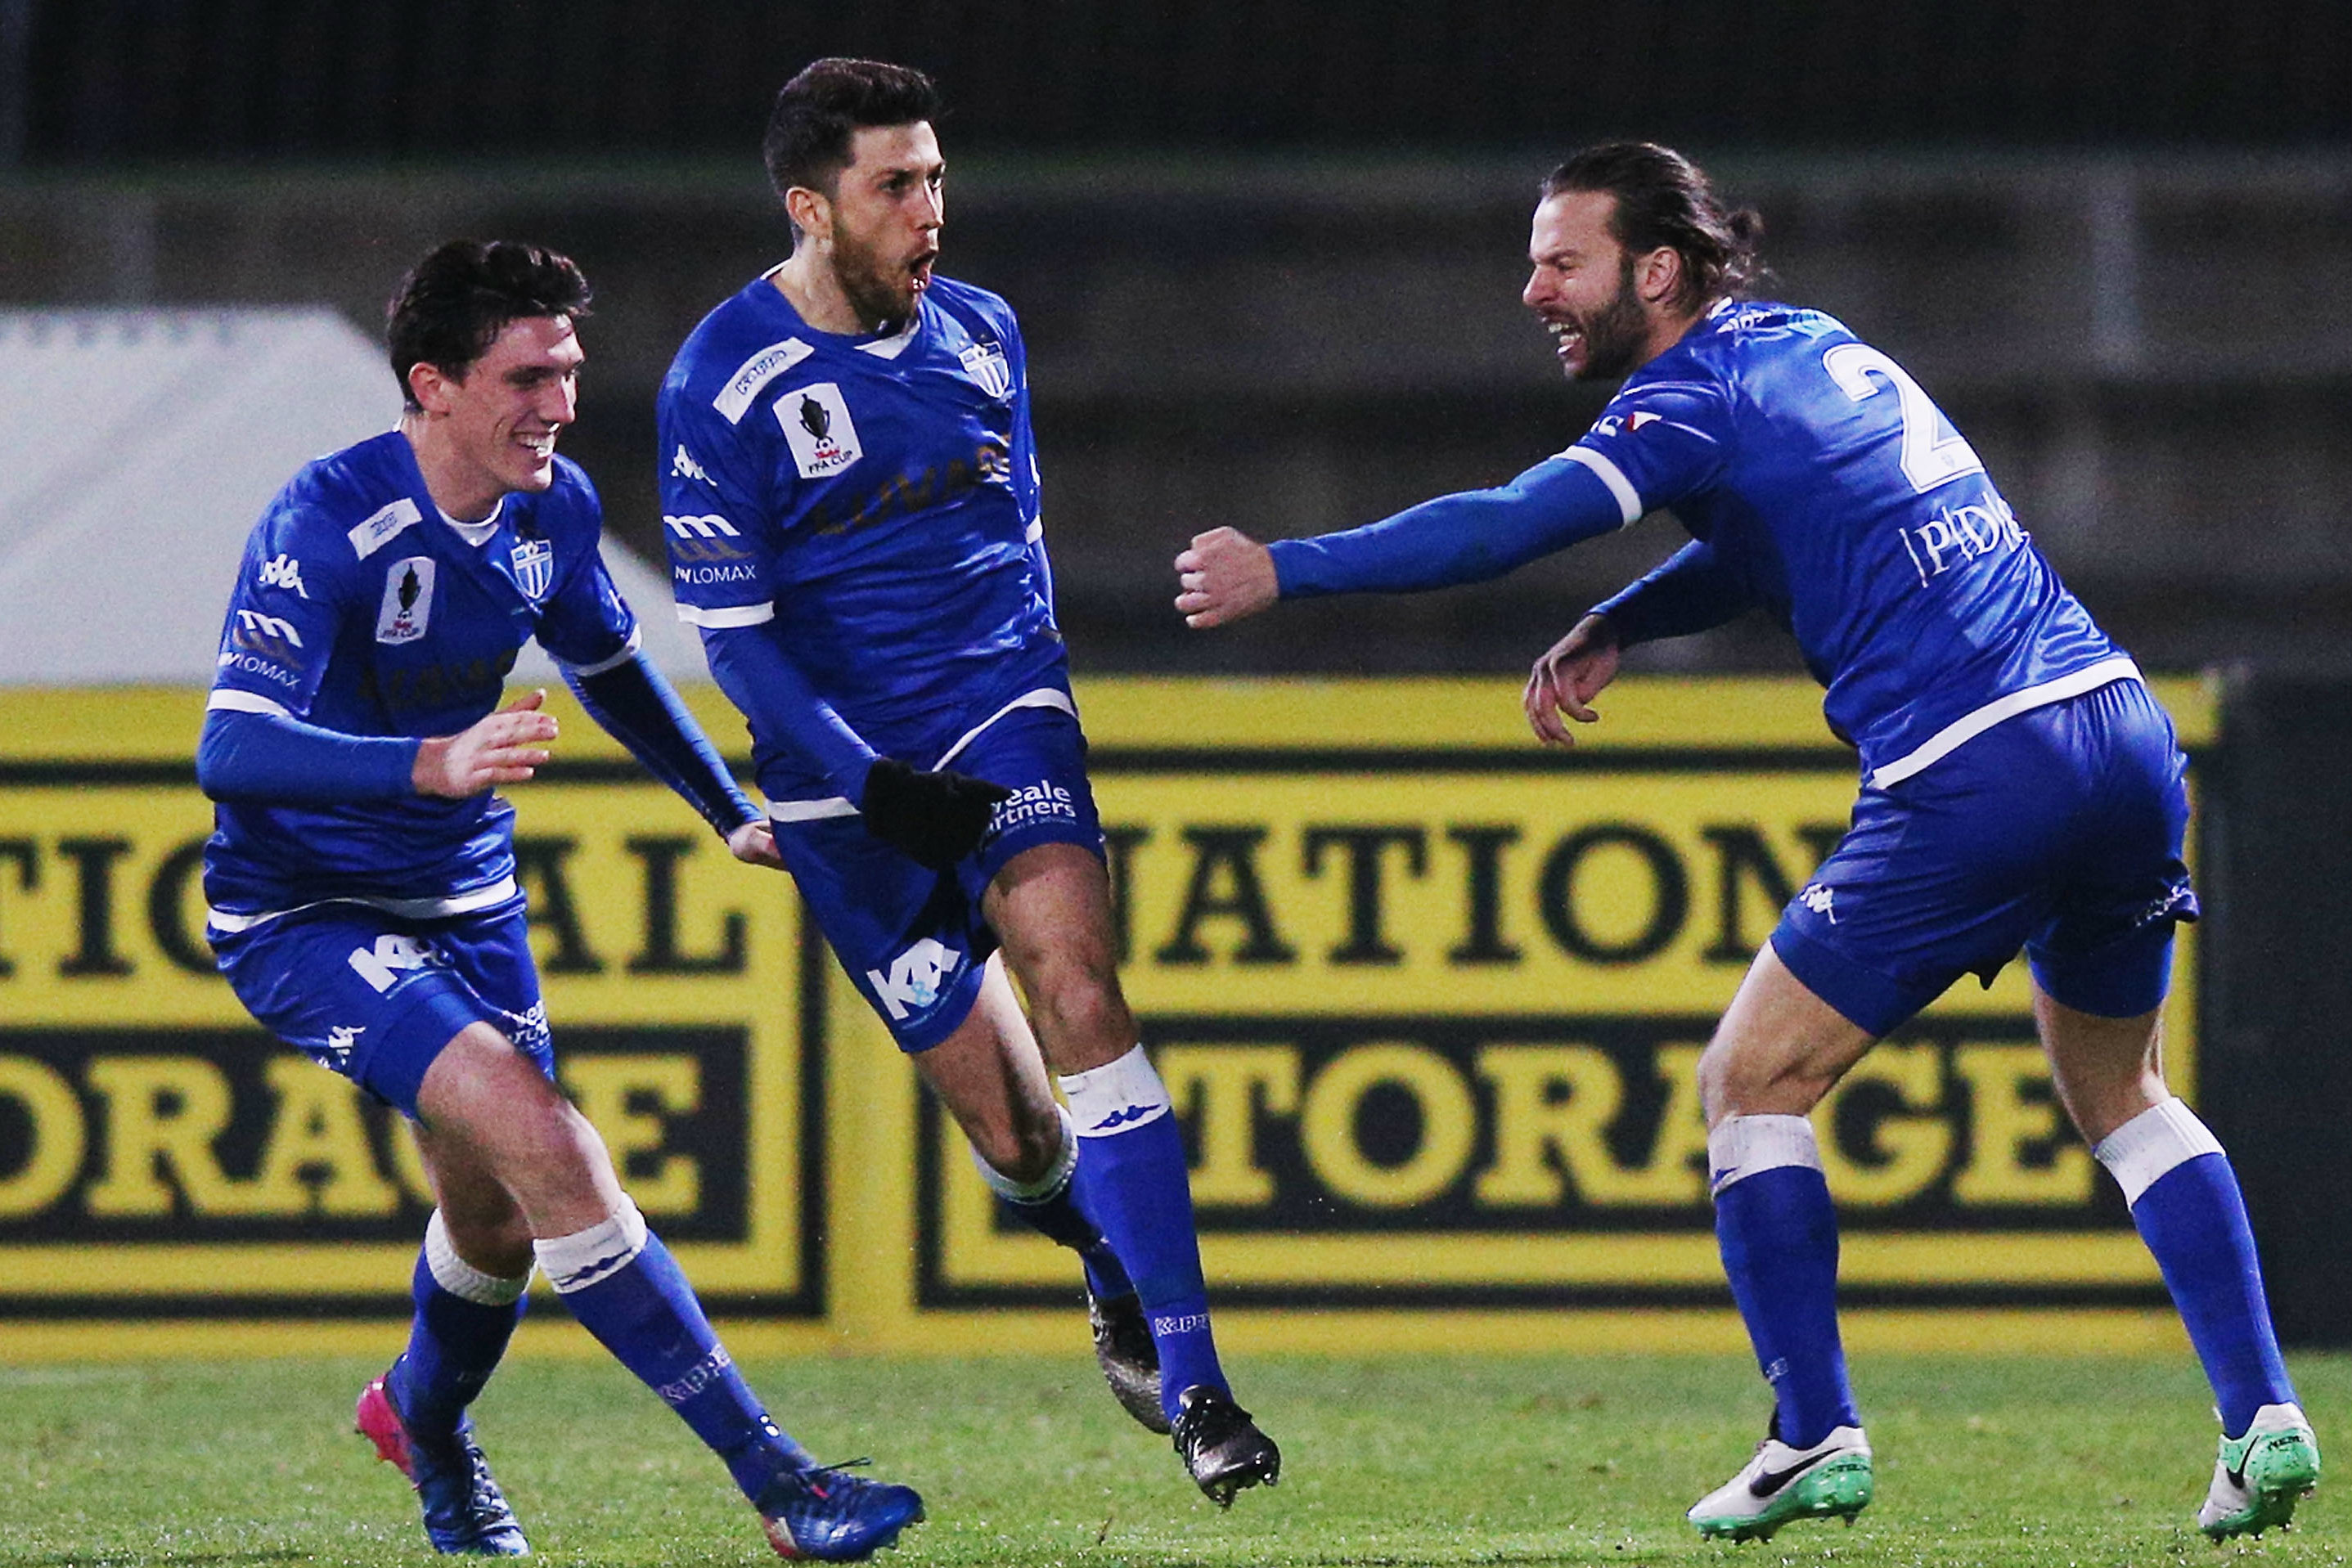 South Melbourne players celebrate a goal on their run to the Westfield FFA Cup semis.